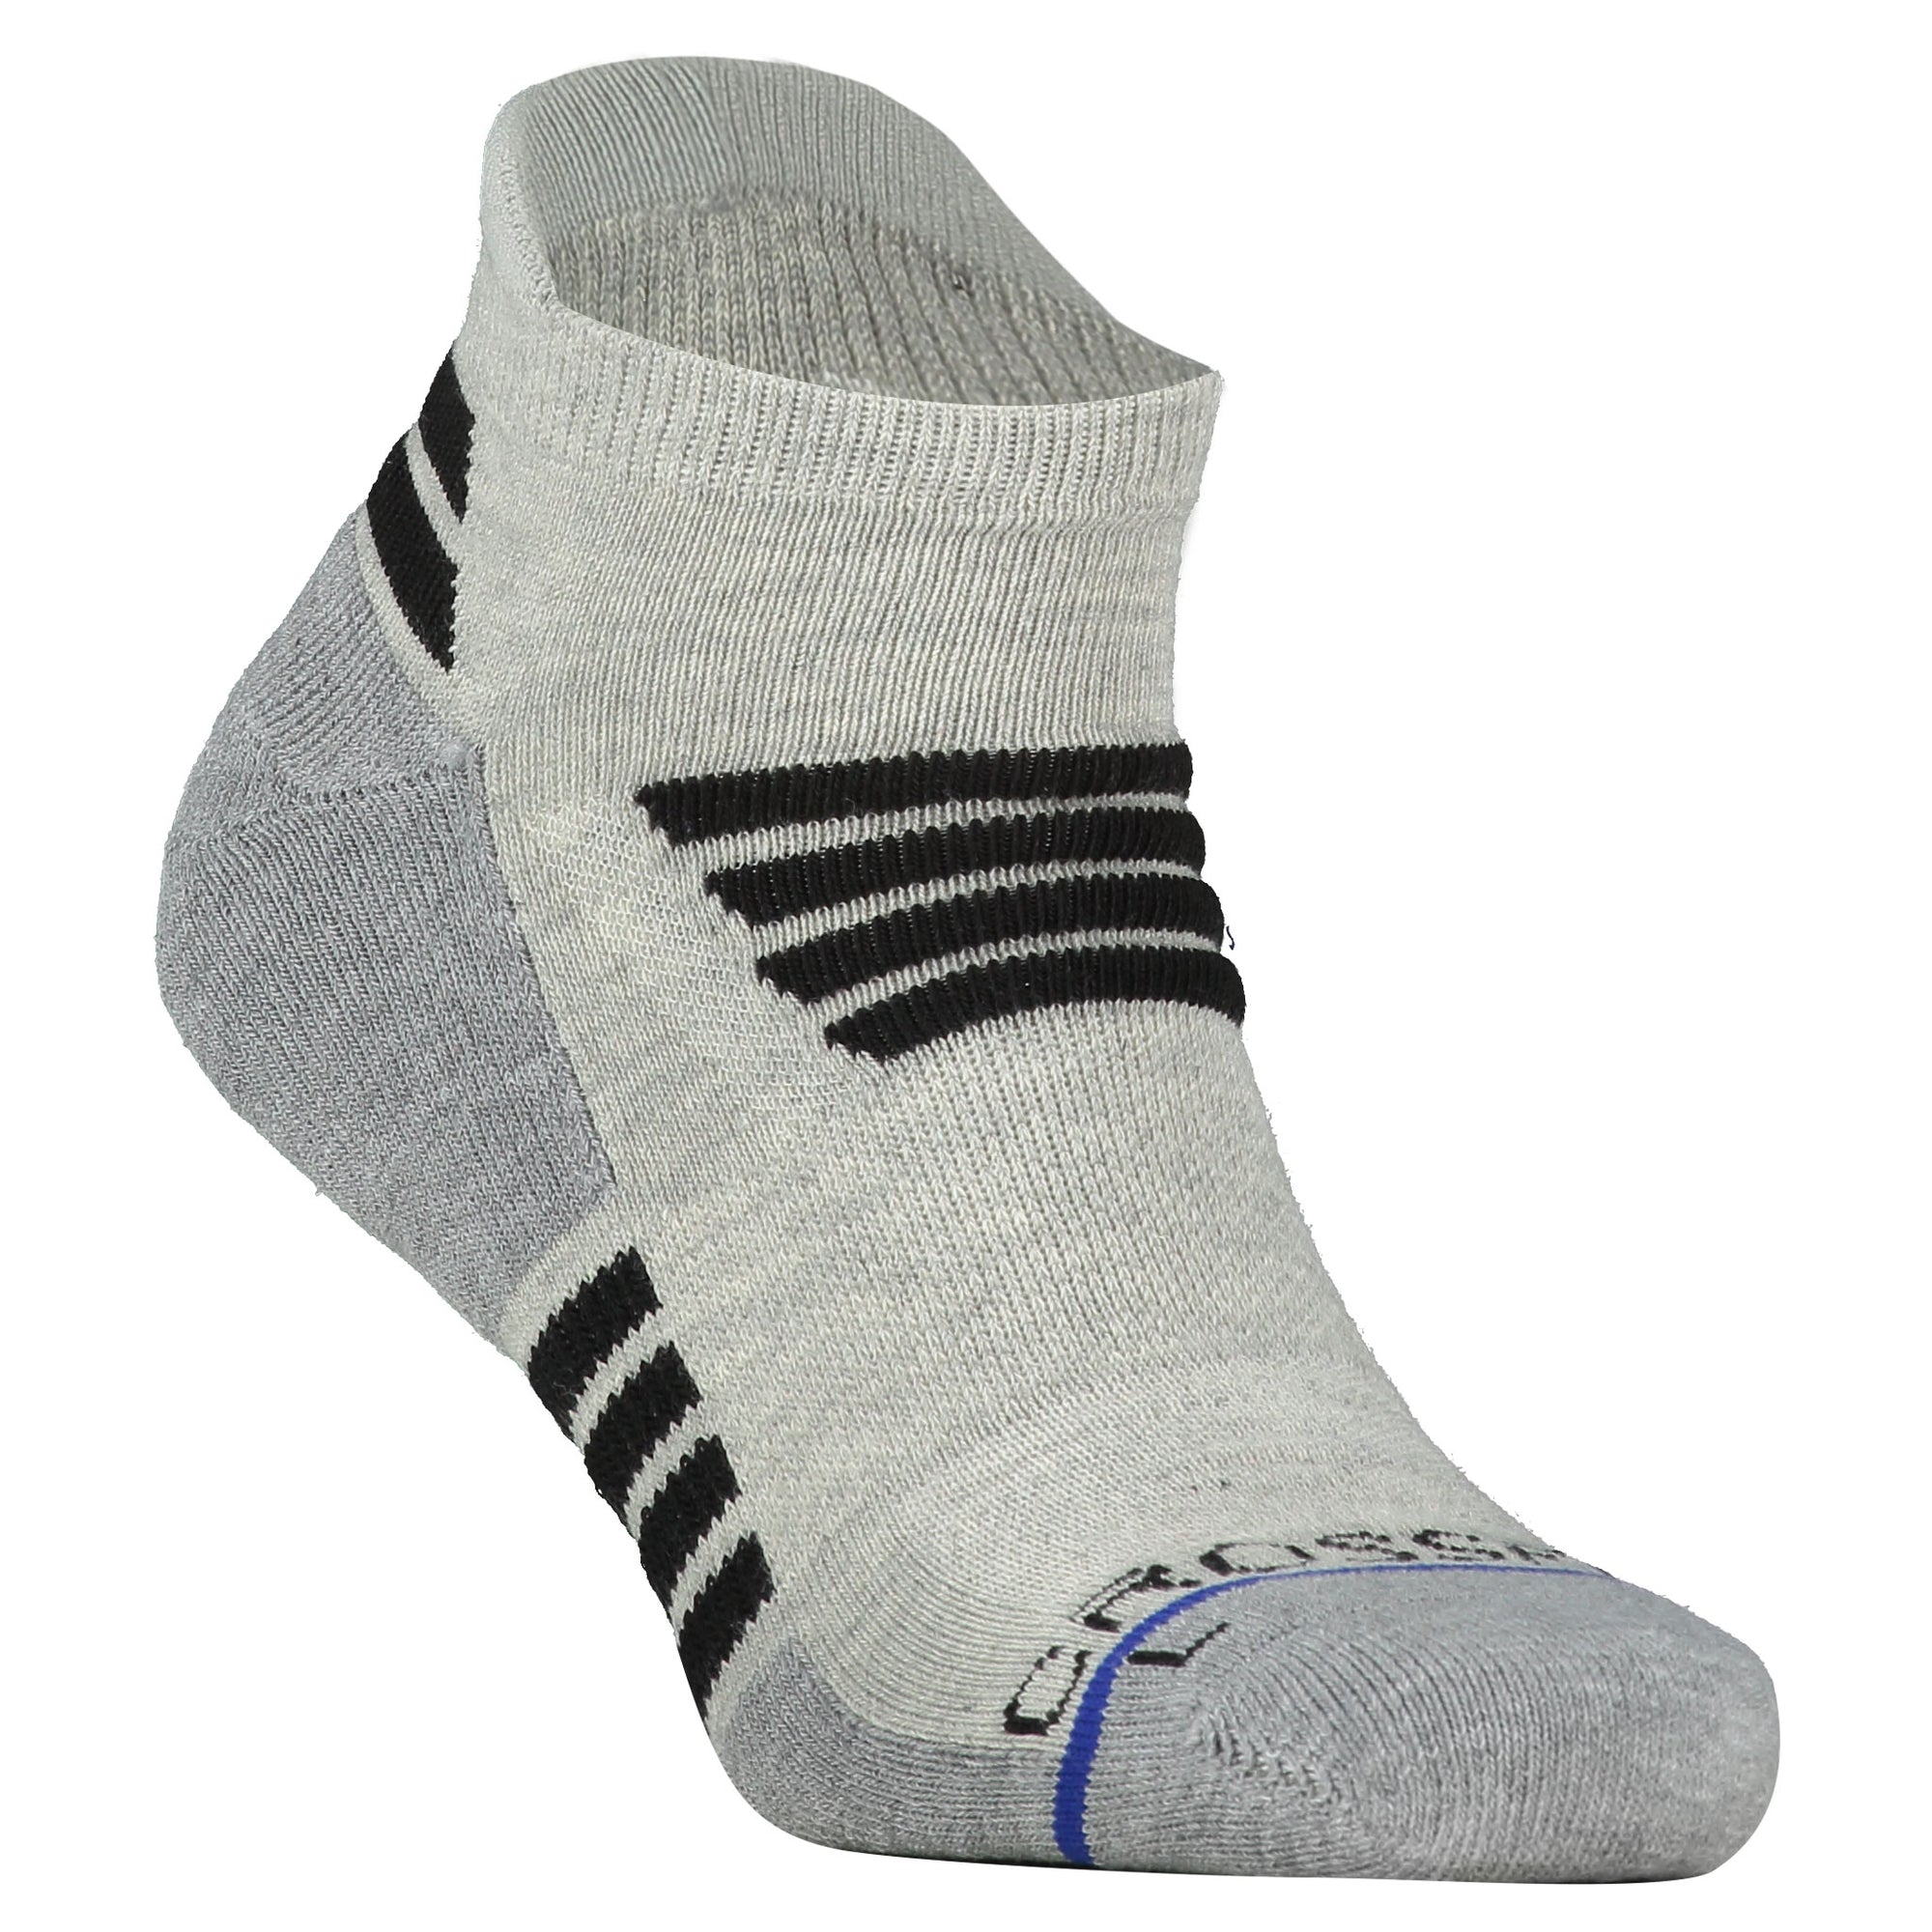 Crossfly men's Tempo Low Socks in grey / black from the Performance series, featuring AirBeams and 180 Hold.